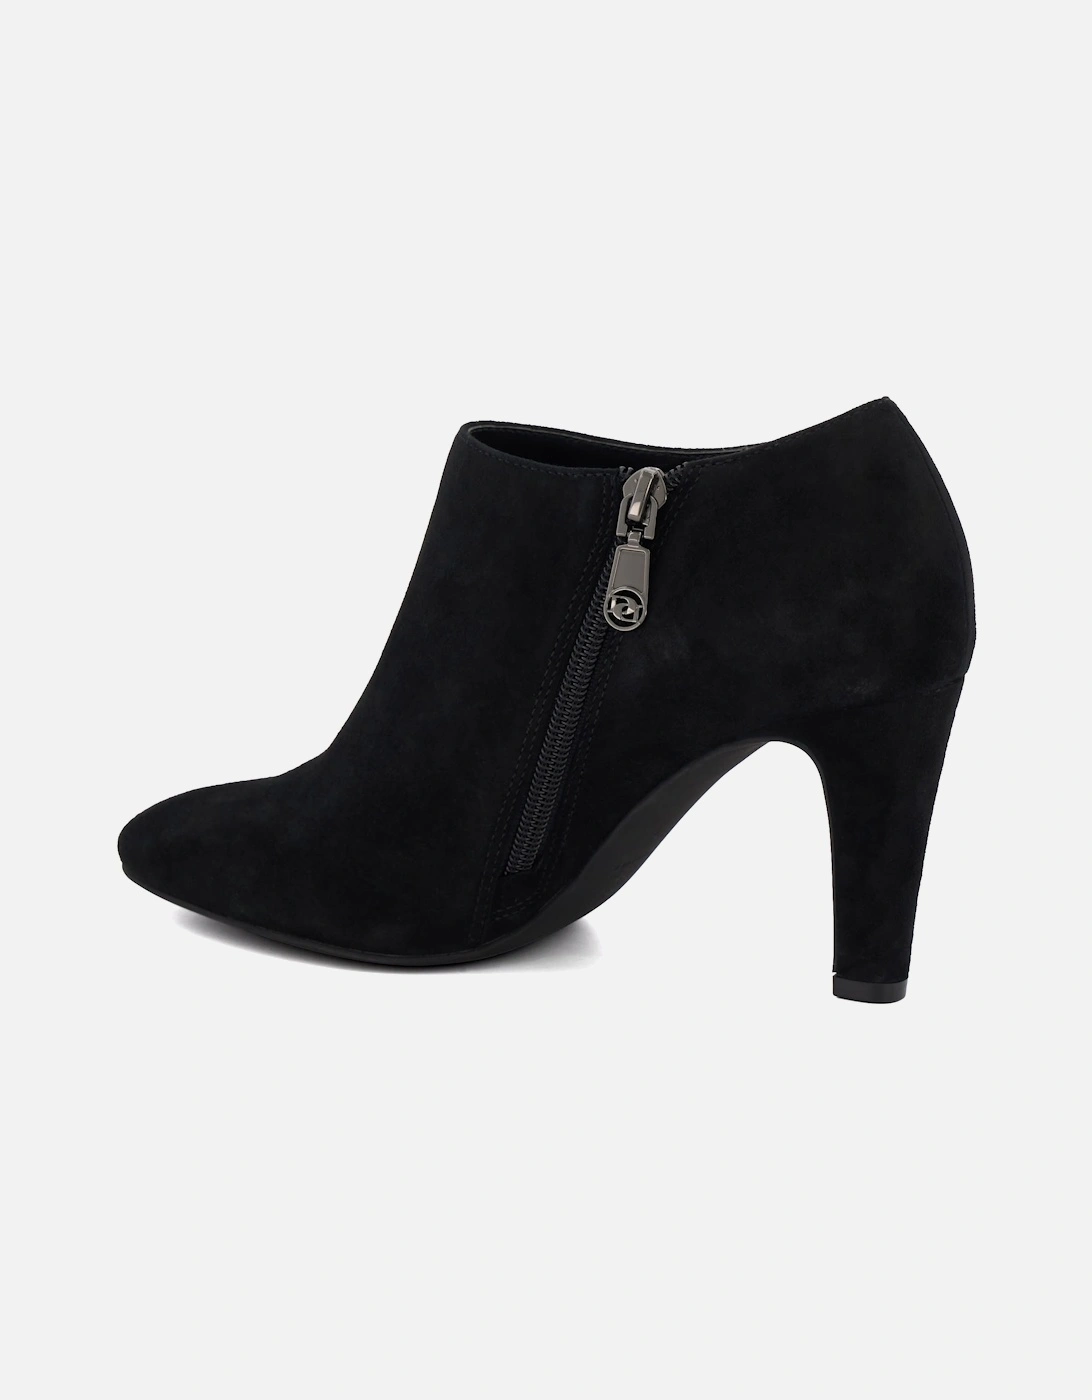 Ladies Opinion - Heeled Ankle Boots